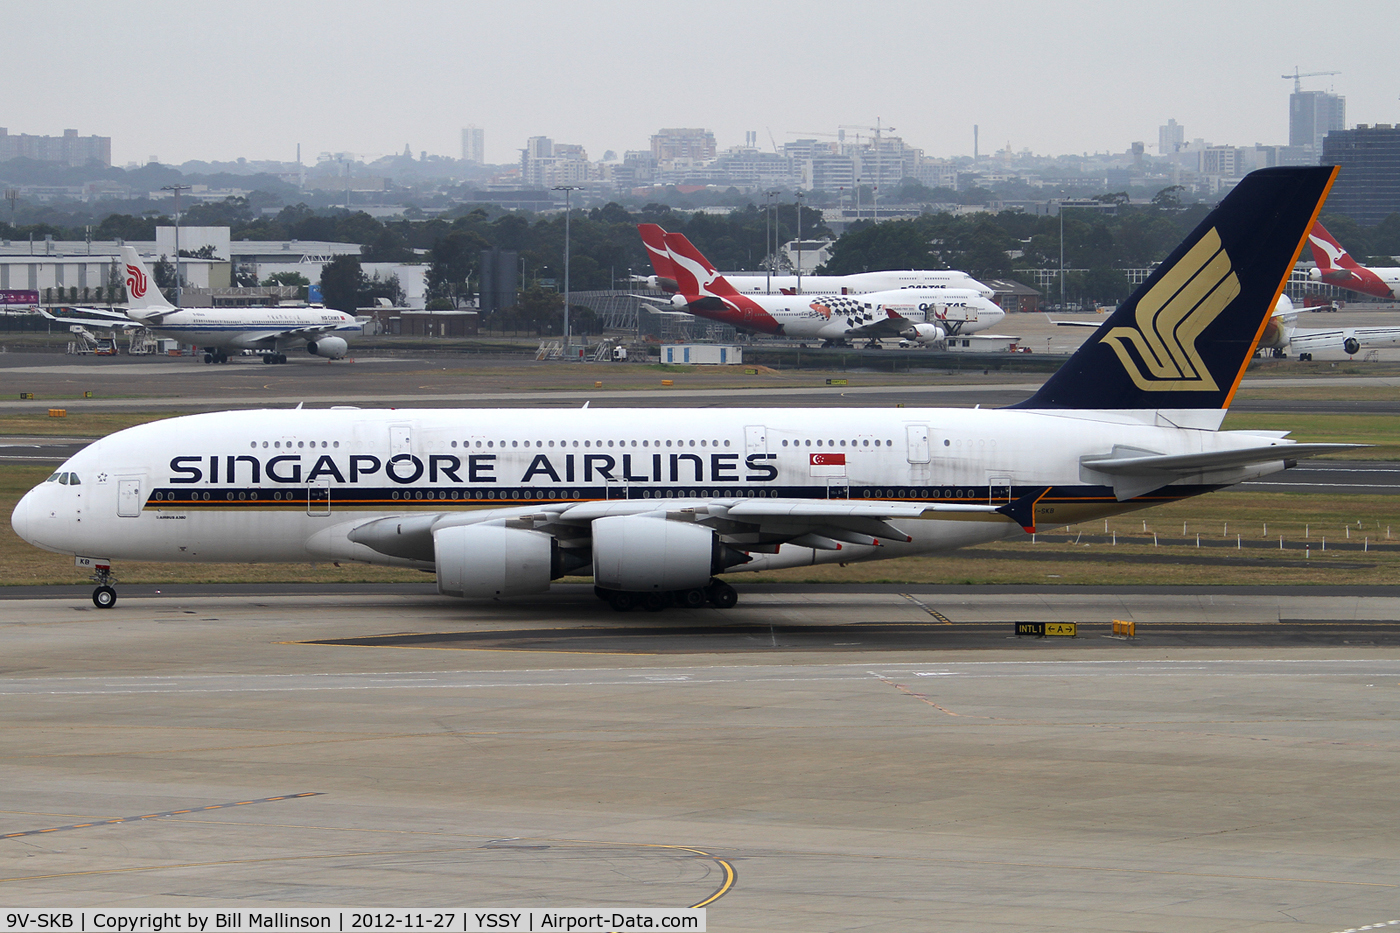 9V-SKB, 2006 Airbus A380-841 C/N 005, taxiing to 16R